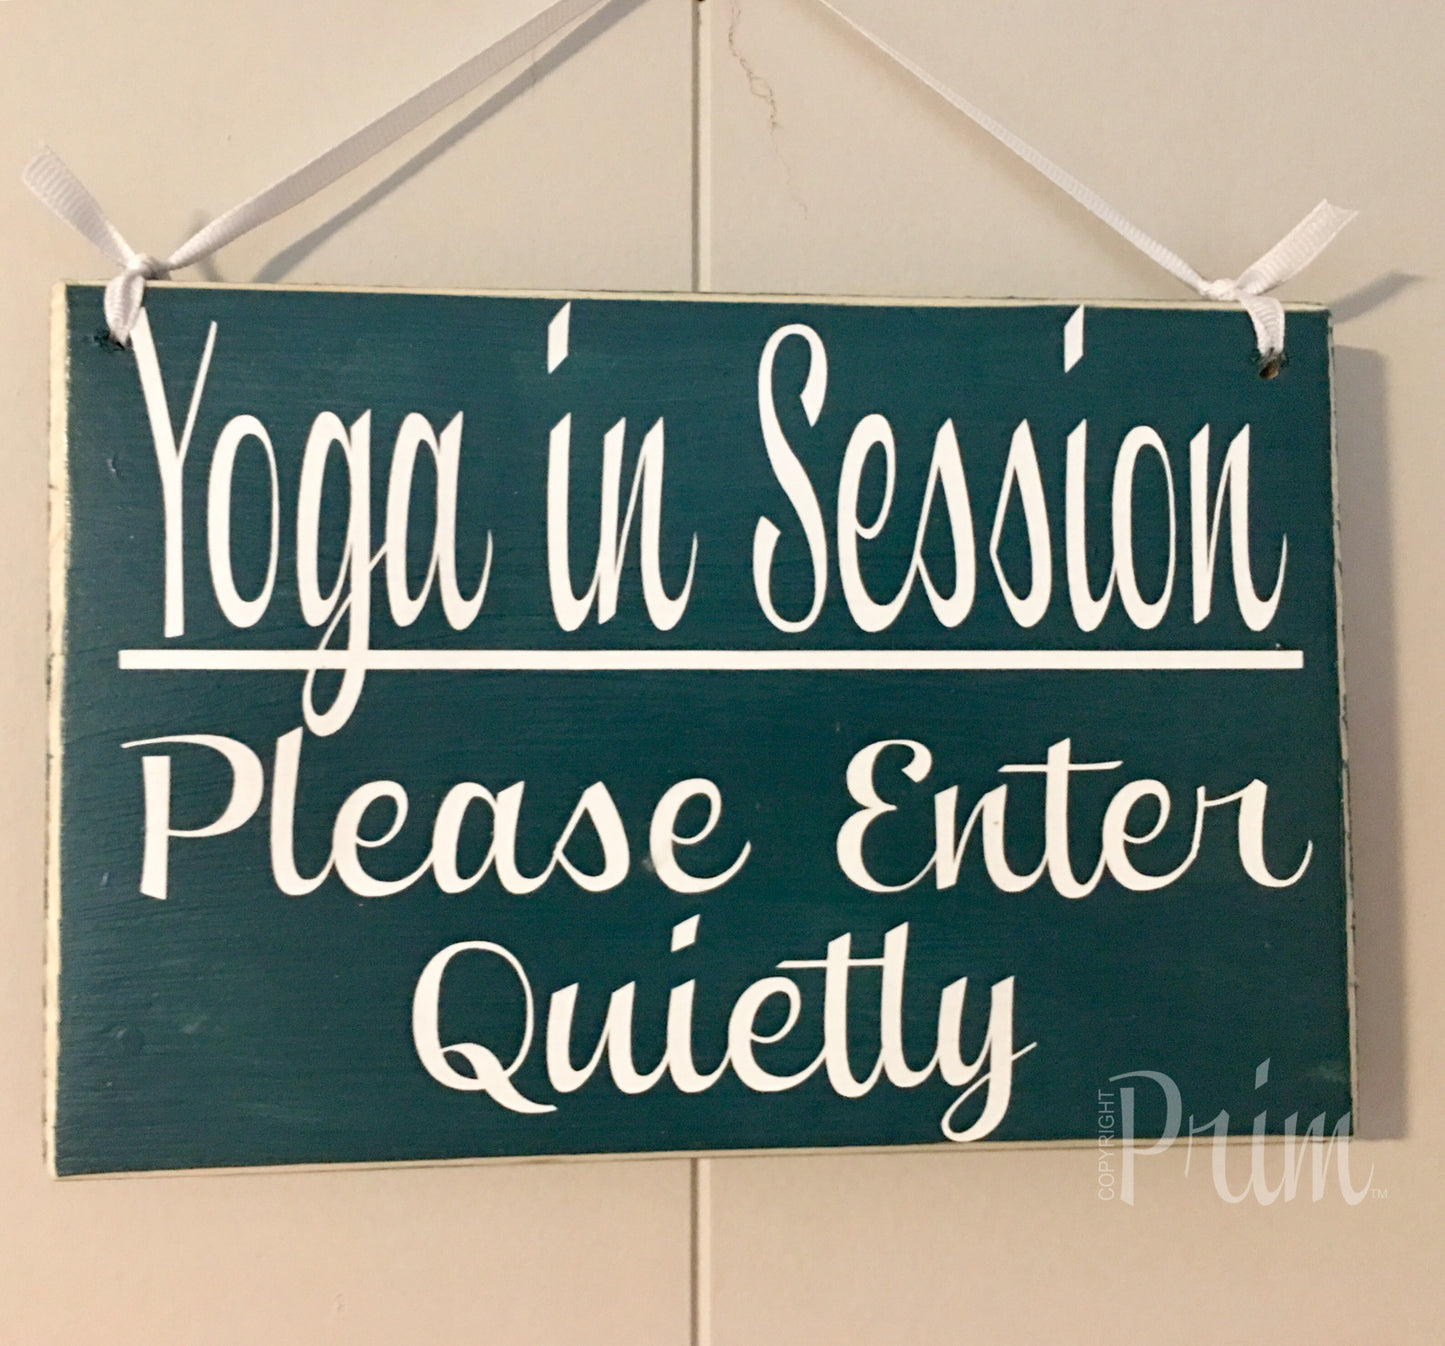 8x6 Yoga In Session Wood Sign